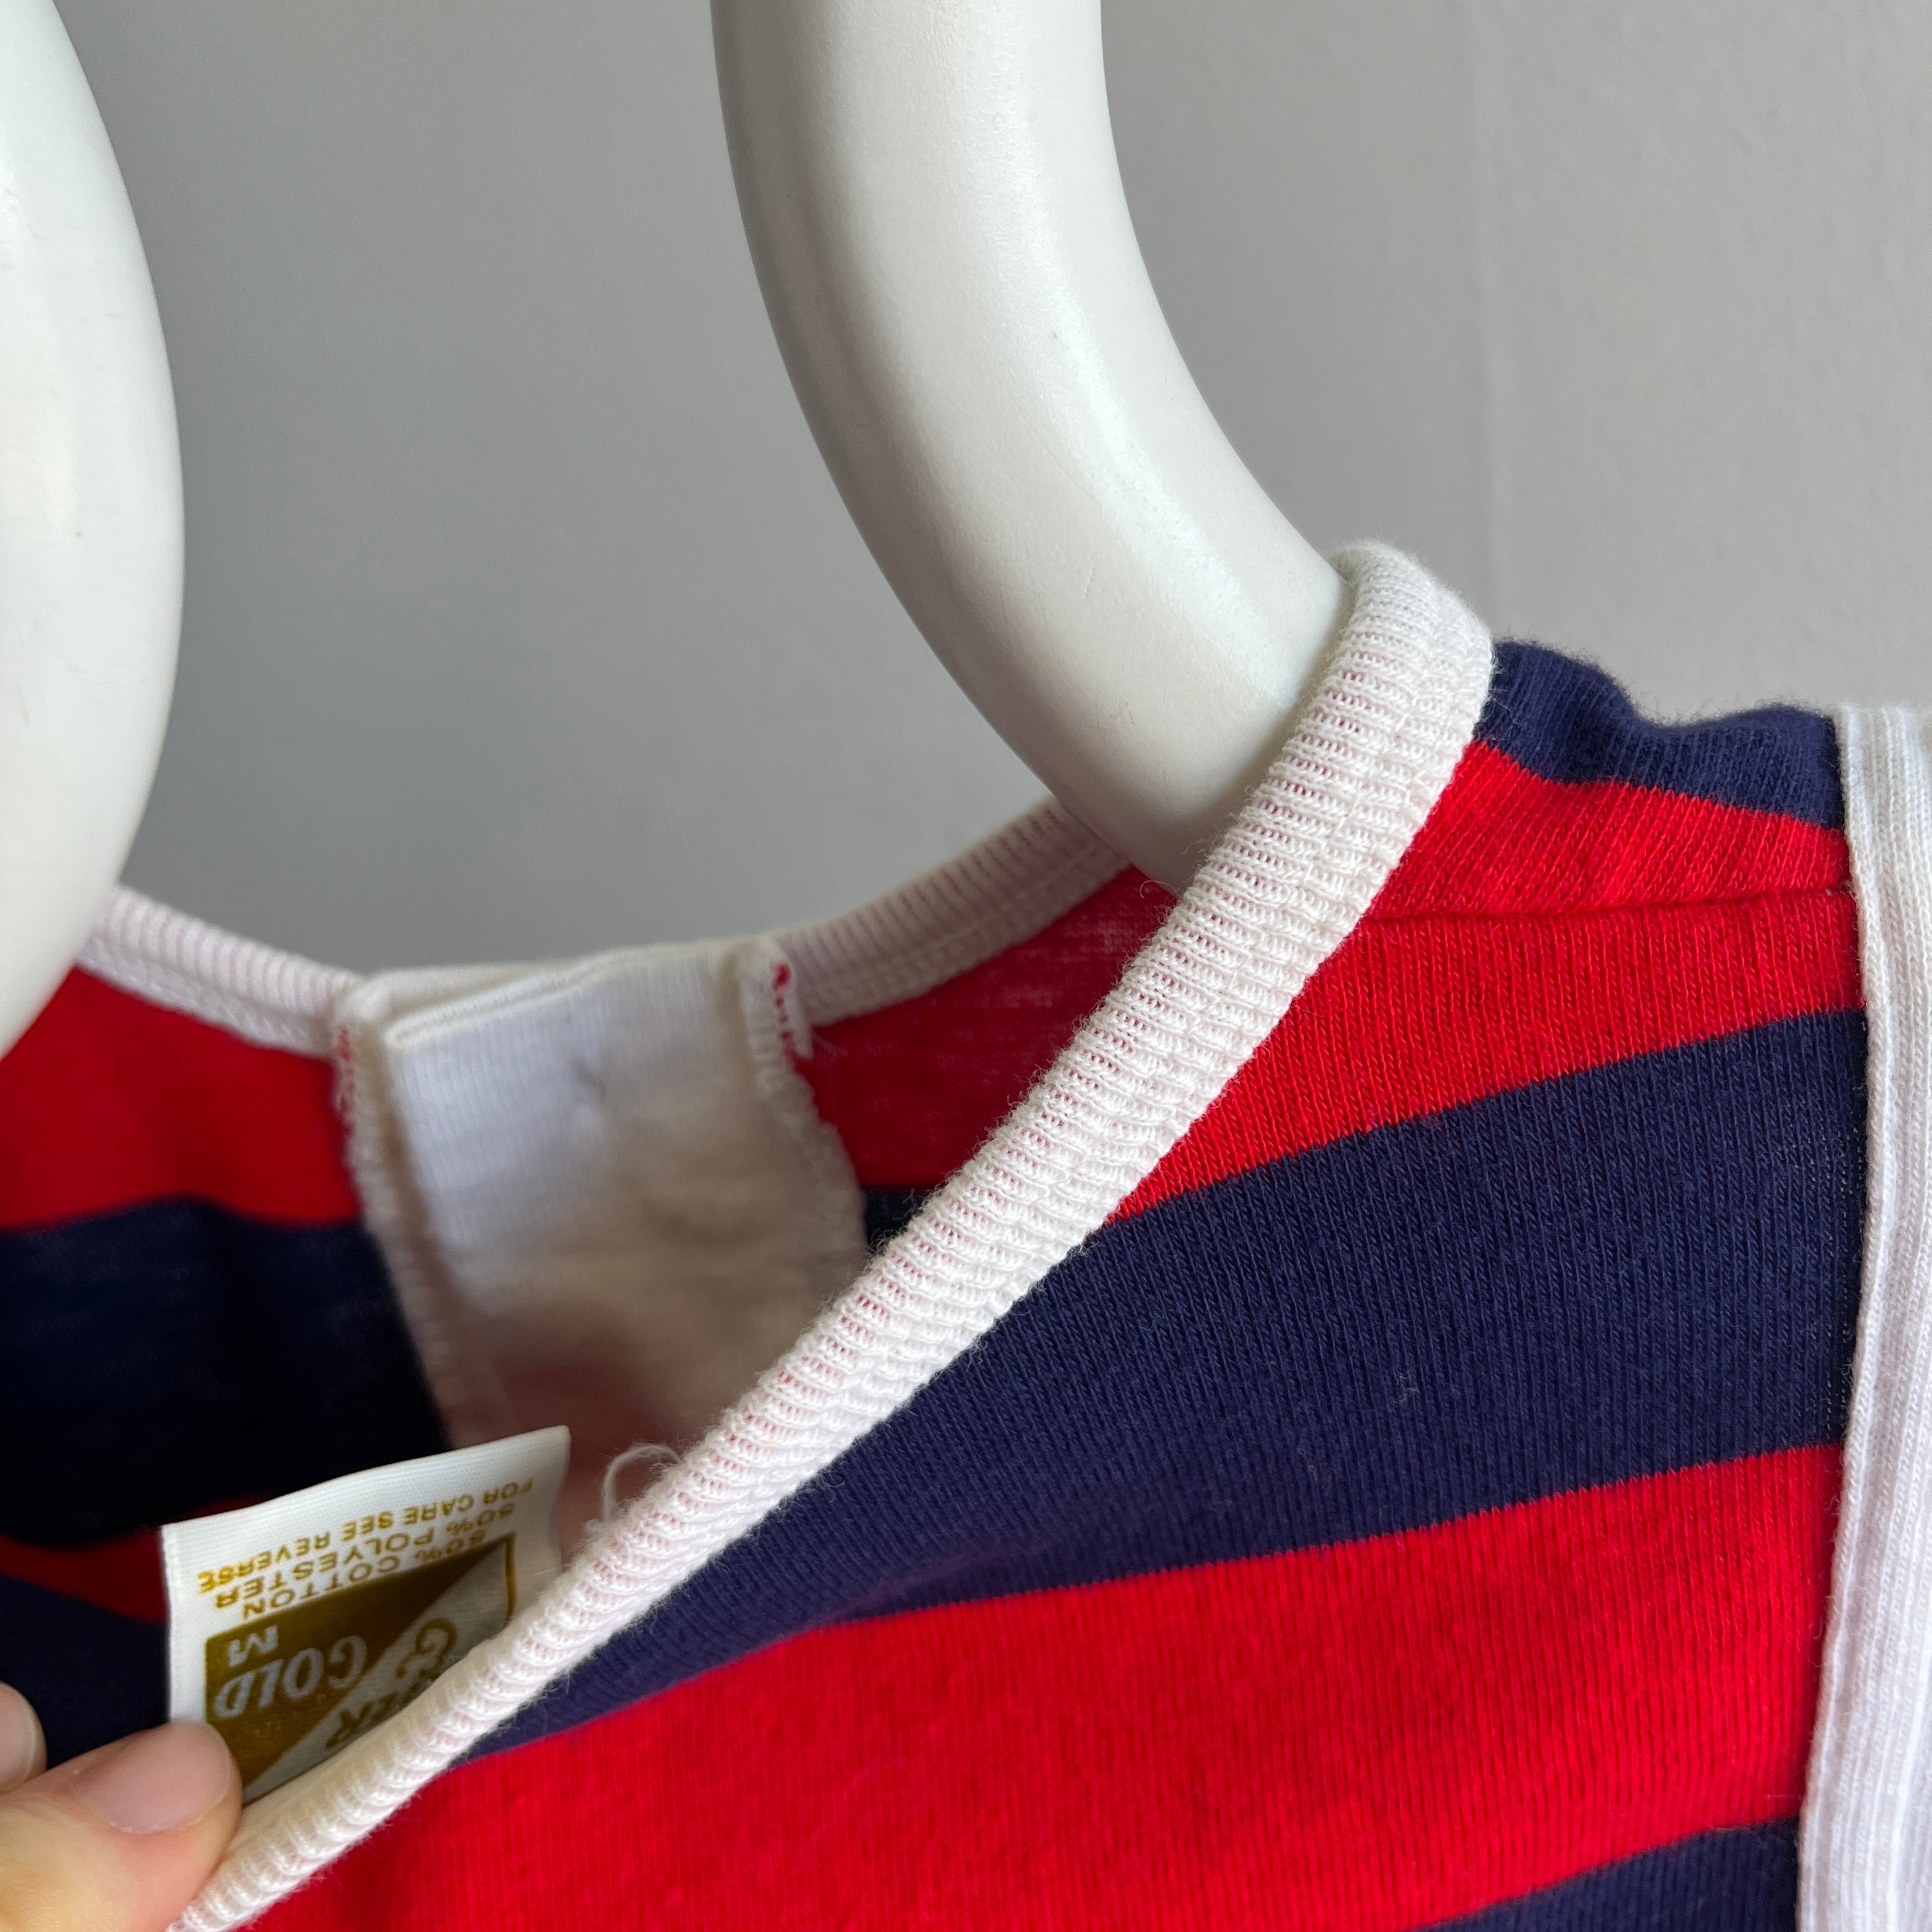 1980s Red and Navy Striped Henley T-Shirt with White SHoulder Patches - !!!!!